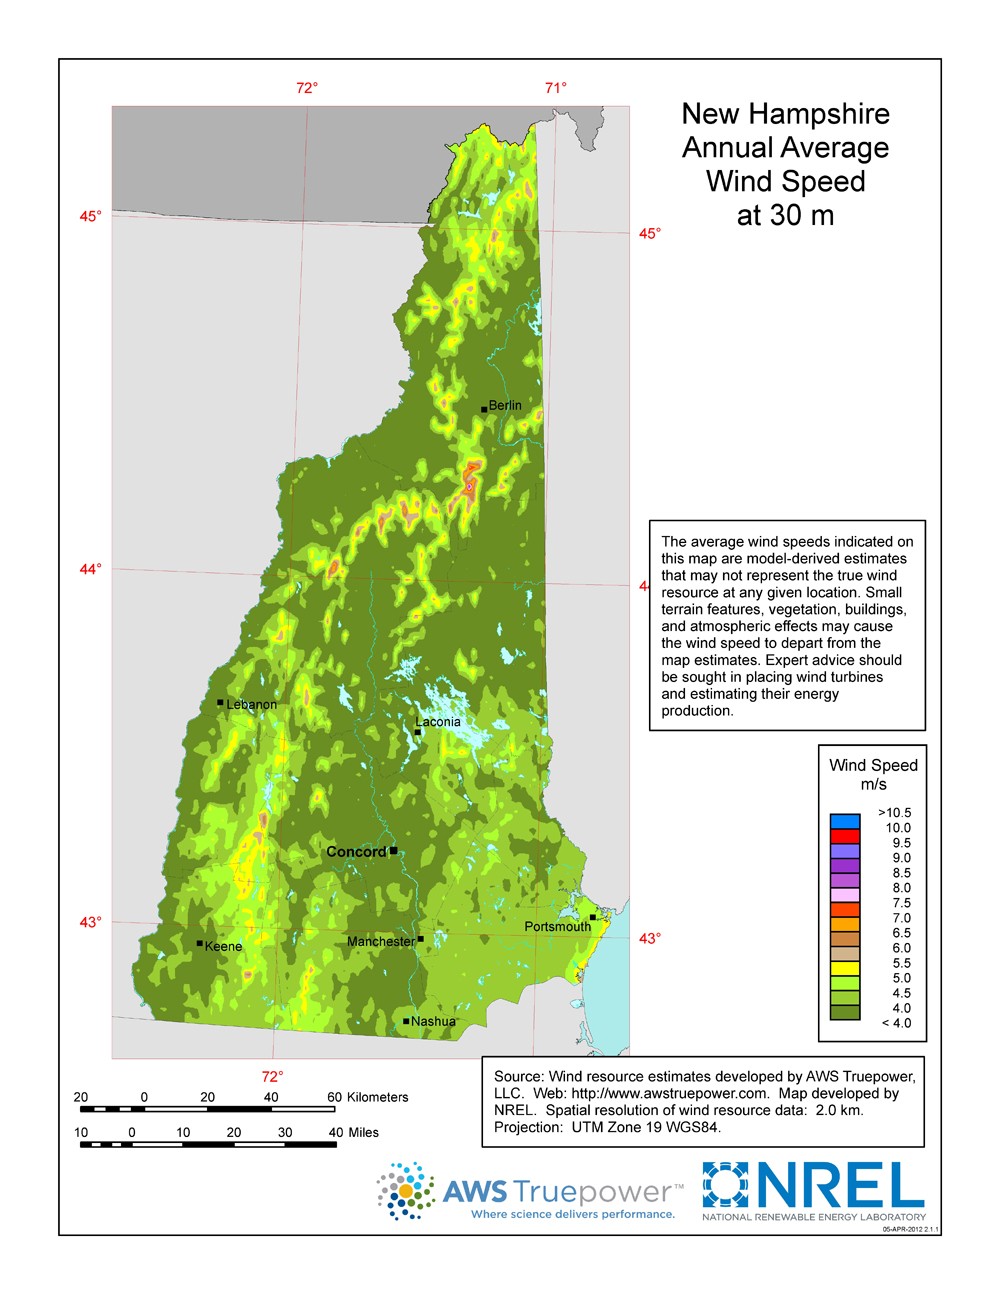 A map of New Hampshire showing wind speeds at a 30-m height.